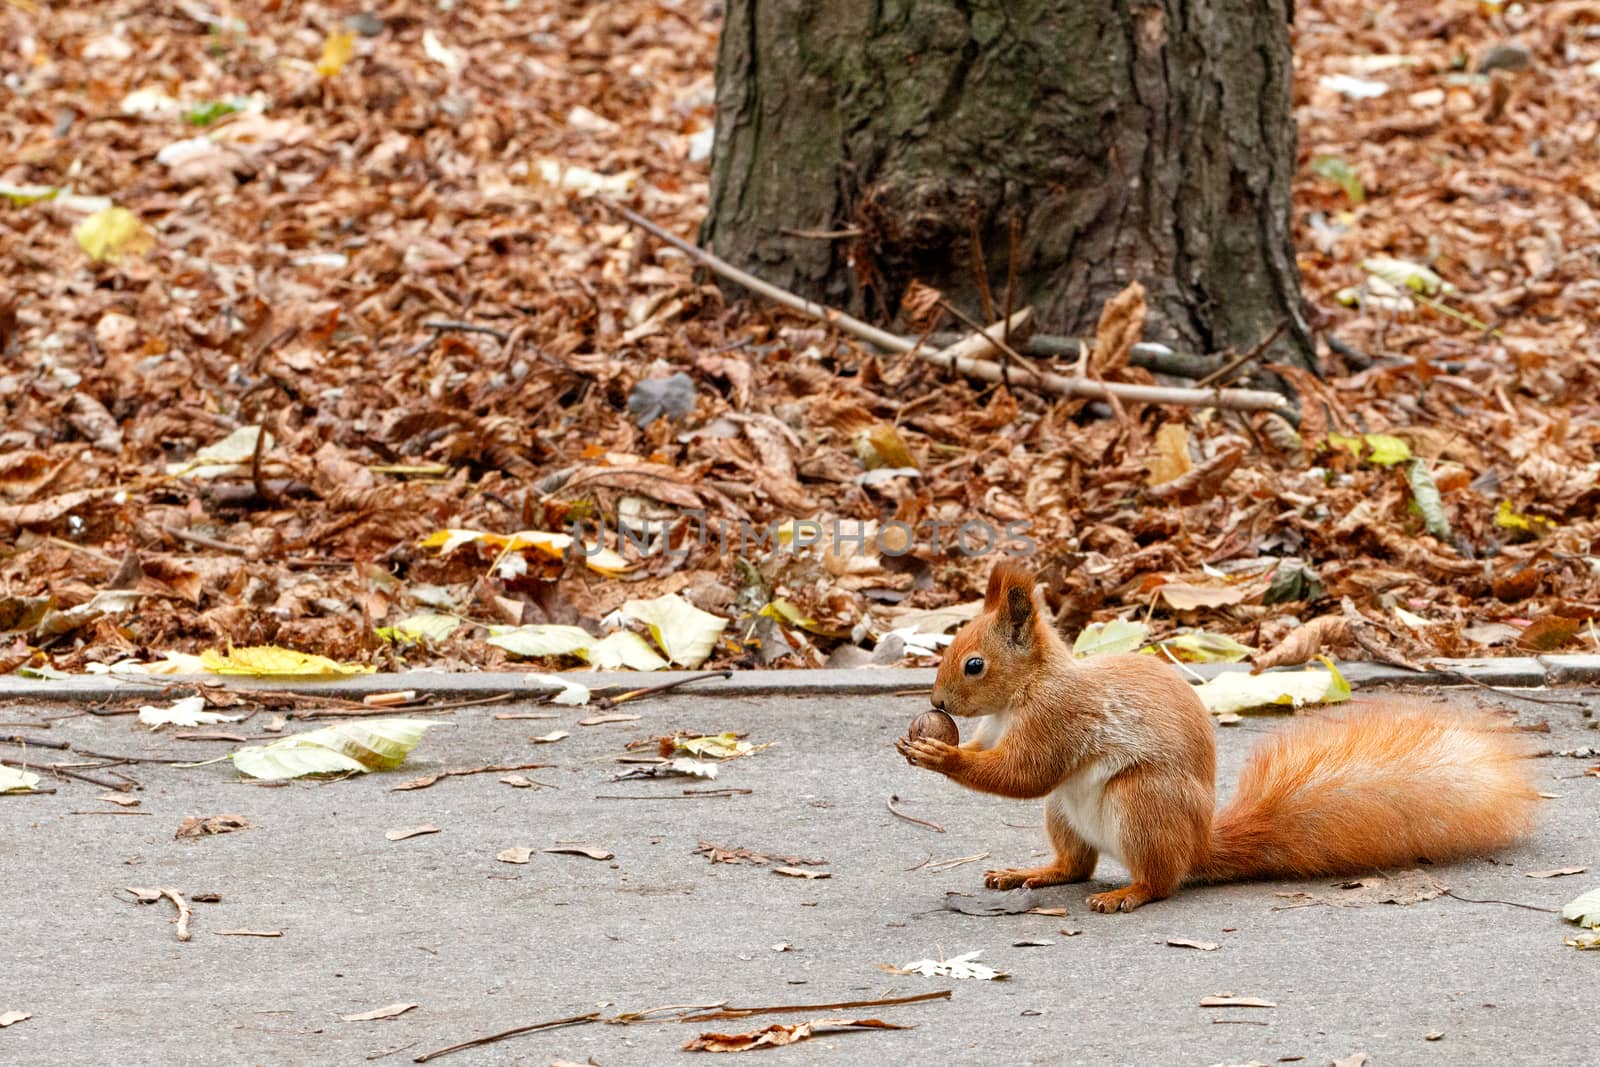 A little orange squirrel holds a nut in its paws, sitting on an asphalt path in an autumn park. by Sergii